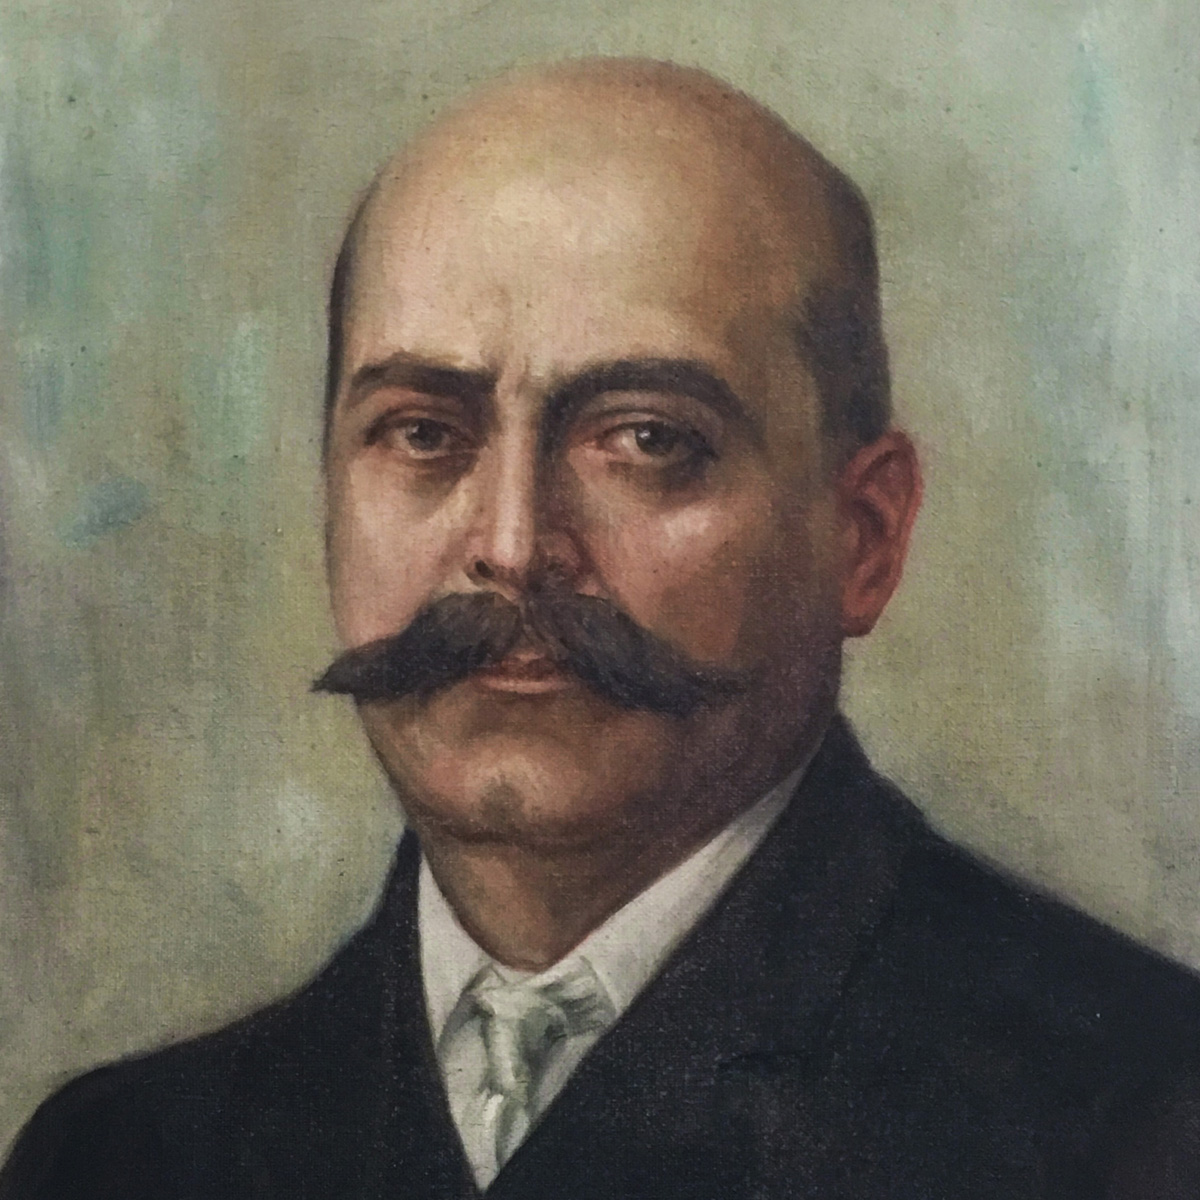 Basil Spiliopoulos founds the distillery – B.G. Spiliopoulos S.A. – in Patras, Greece, in 1895.